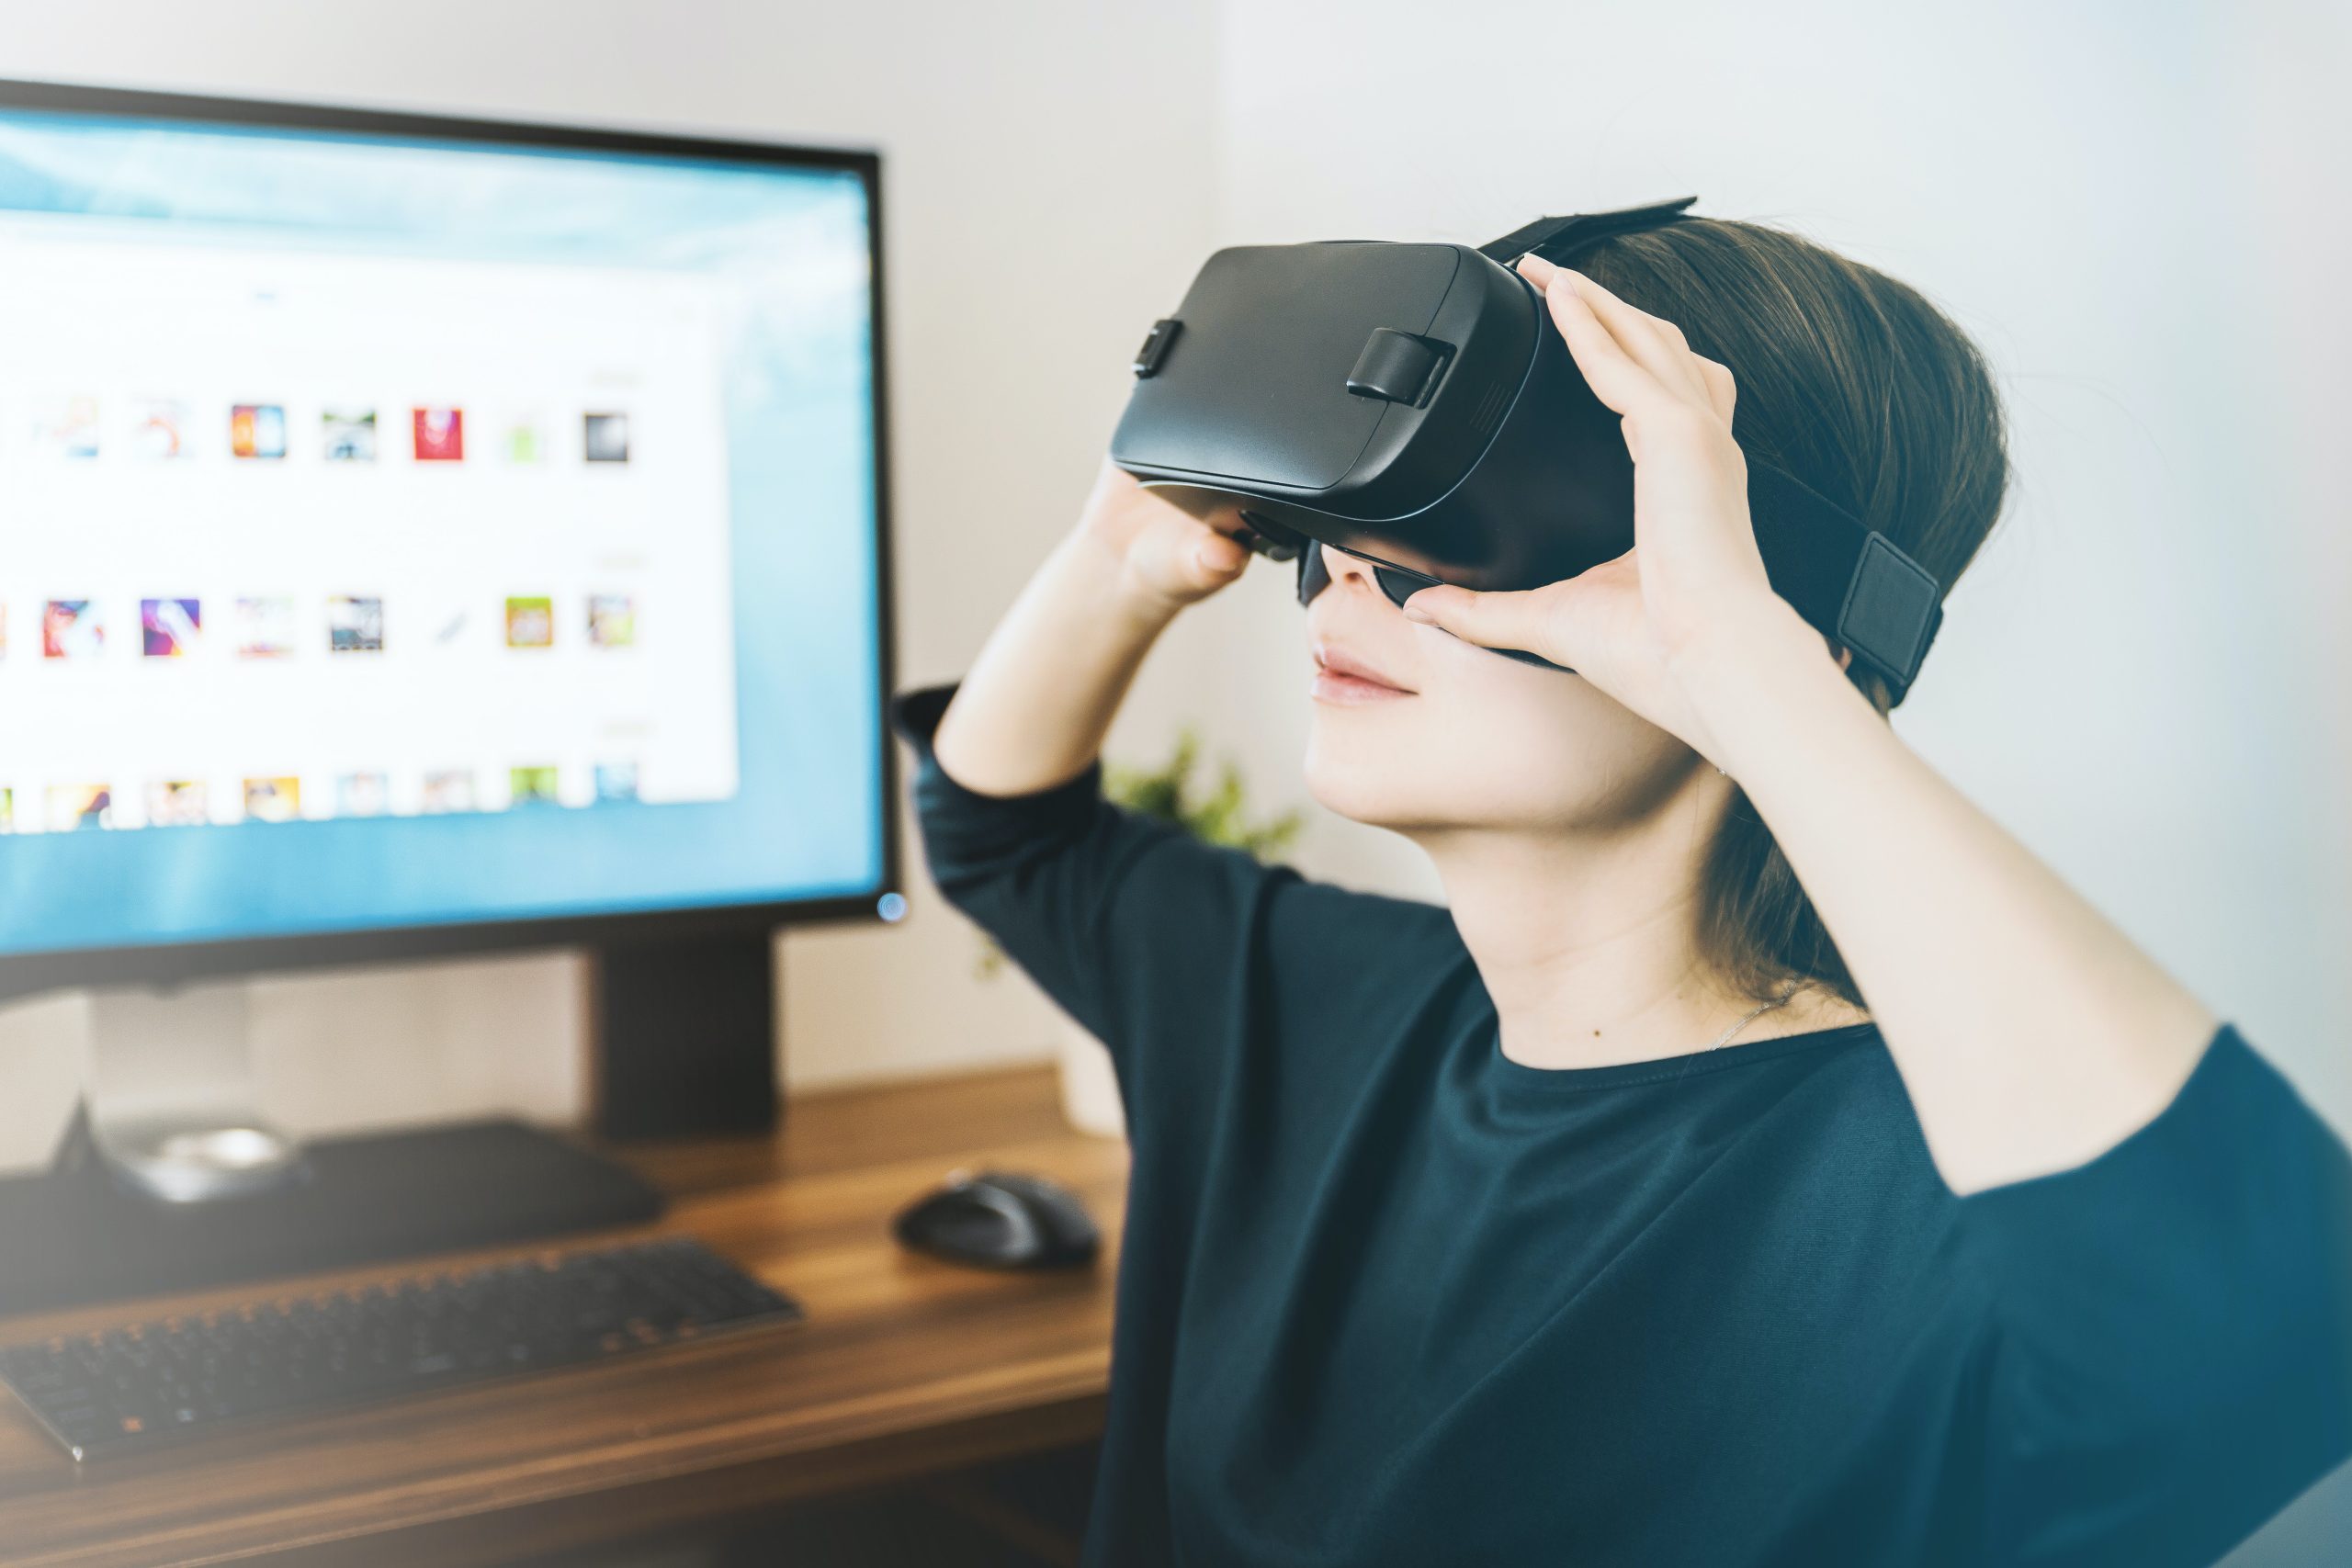 an image of a person using a virtual reality headset.